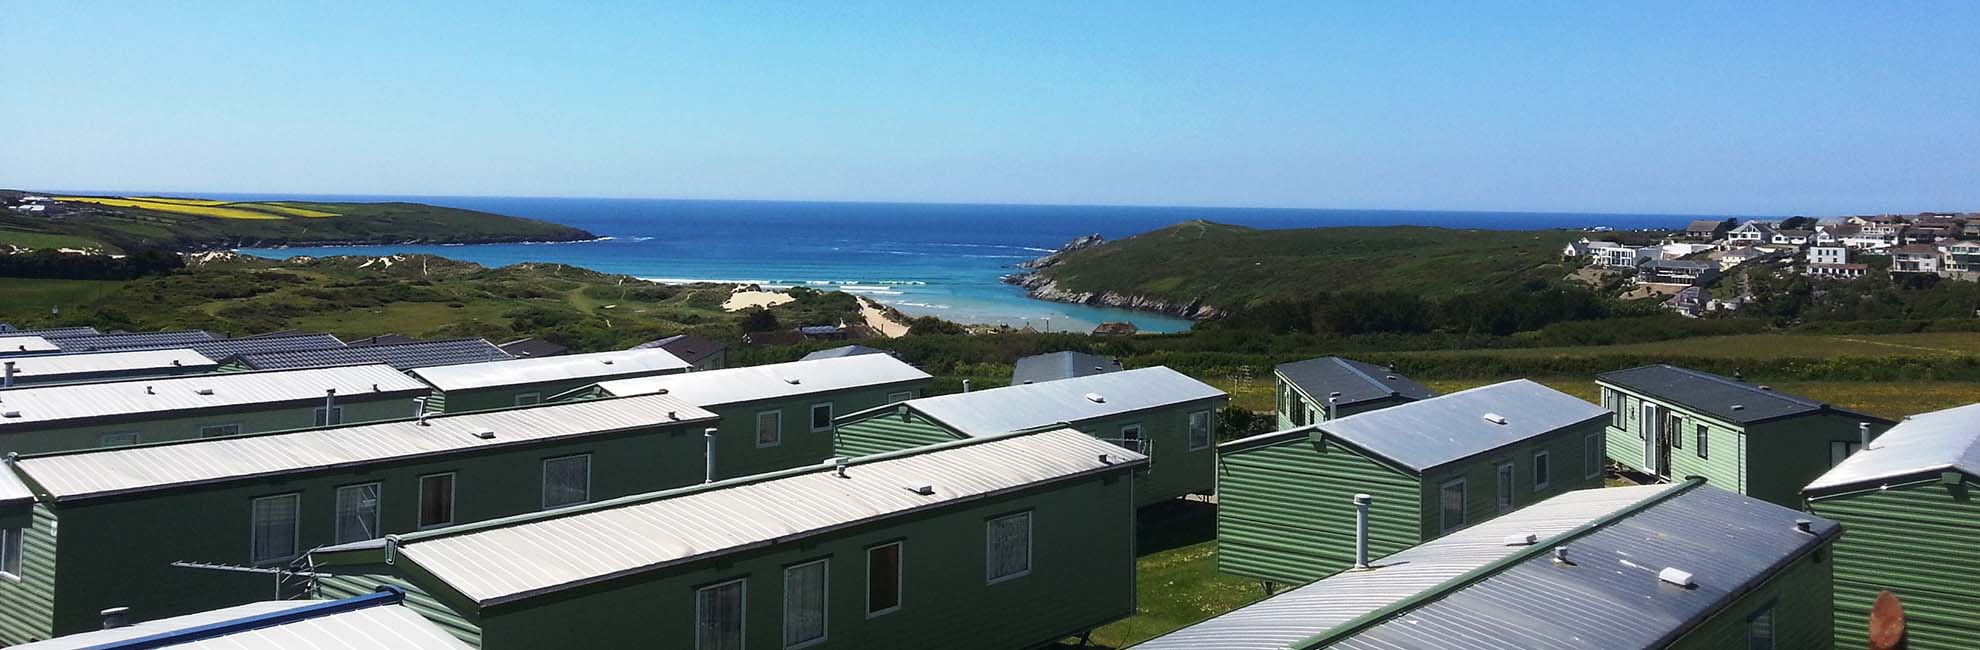 A view across the caravans overlooking the sea at Crantock Beach Holiday Park